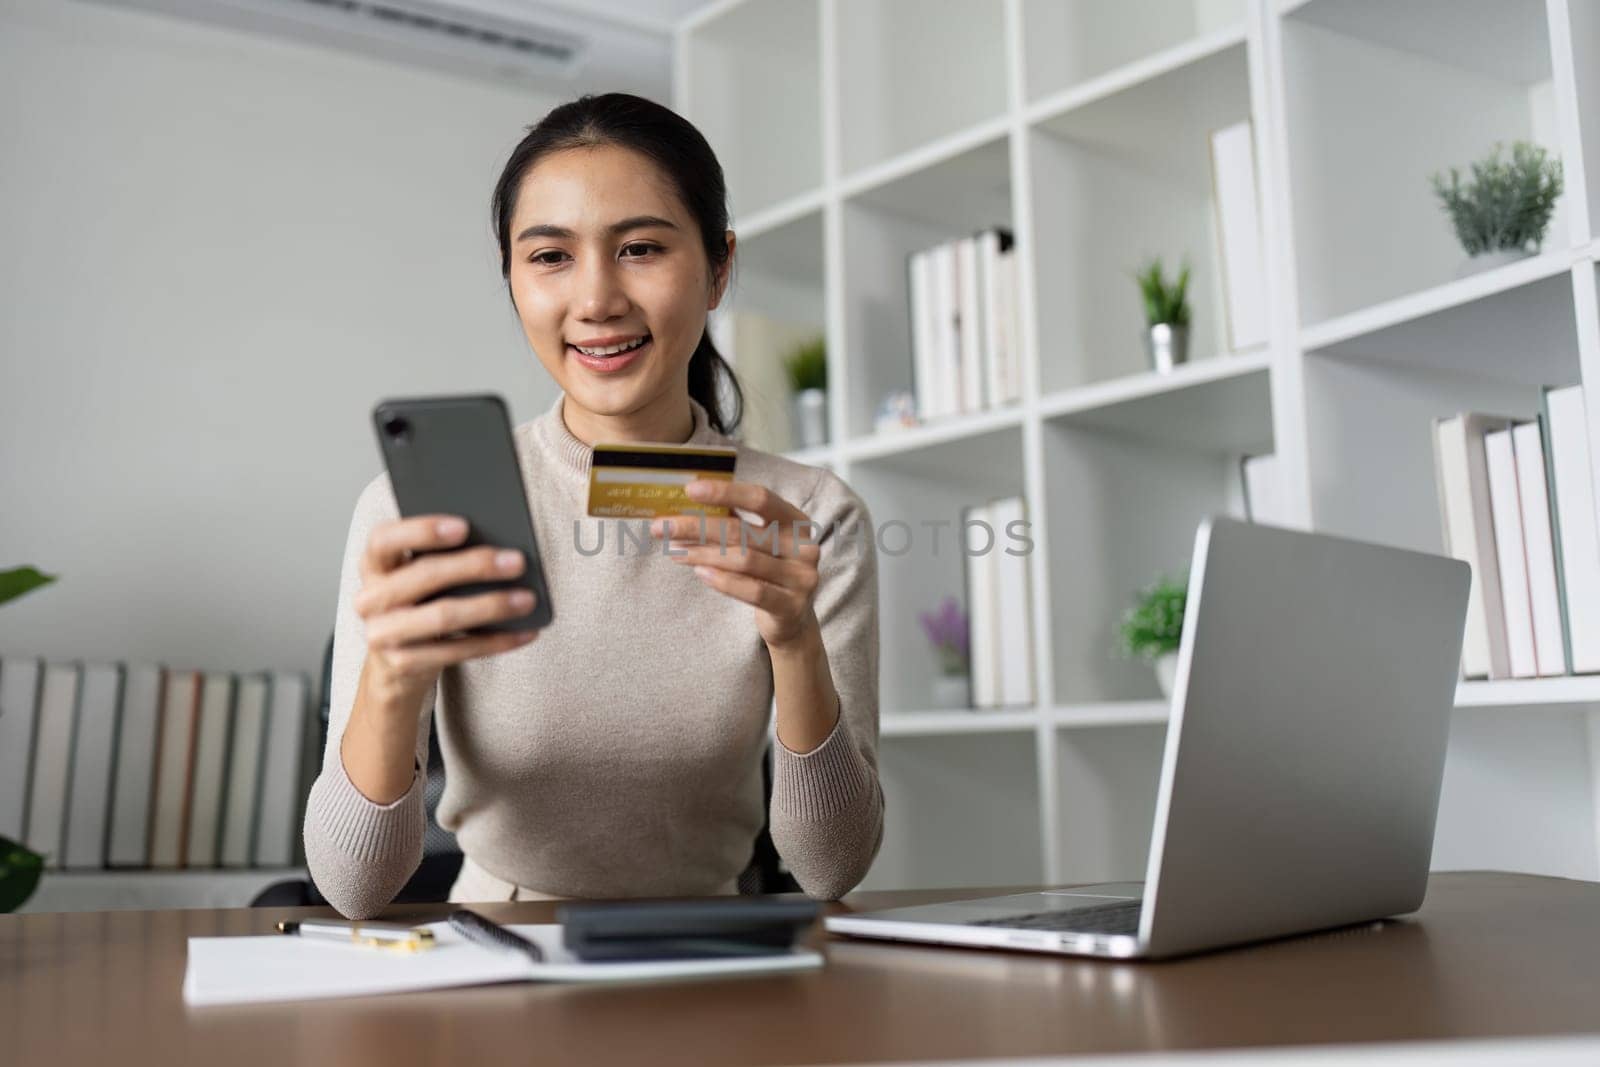 Woman using laptop computer and mobile phone holding credit card for shopping online.